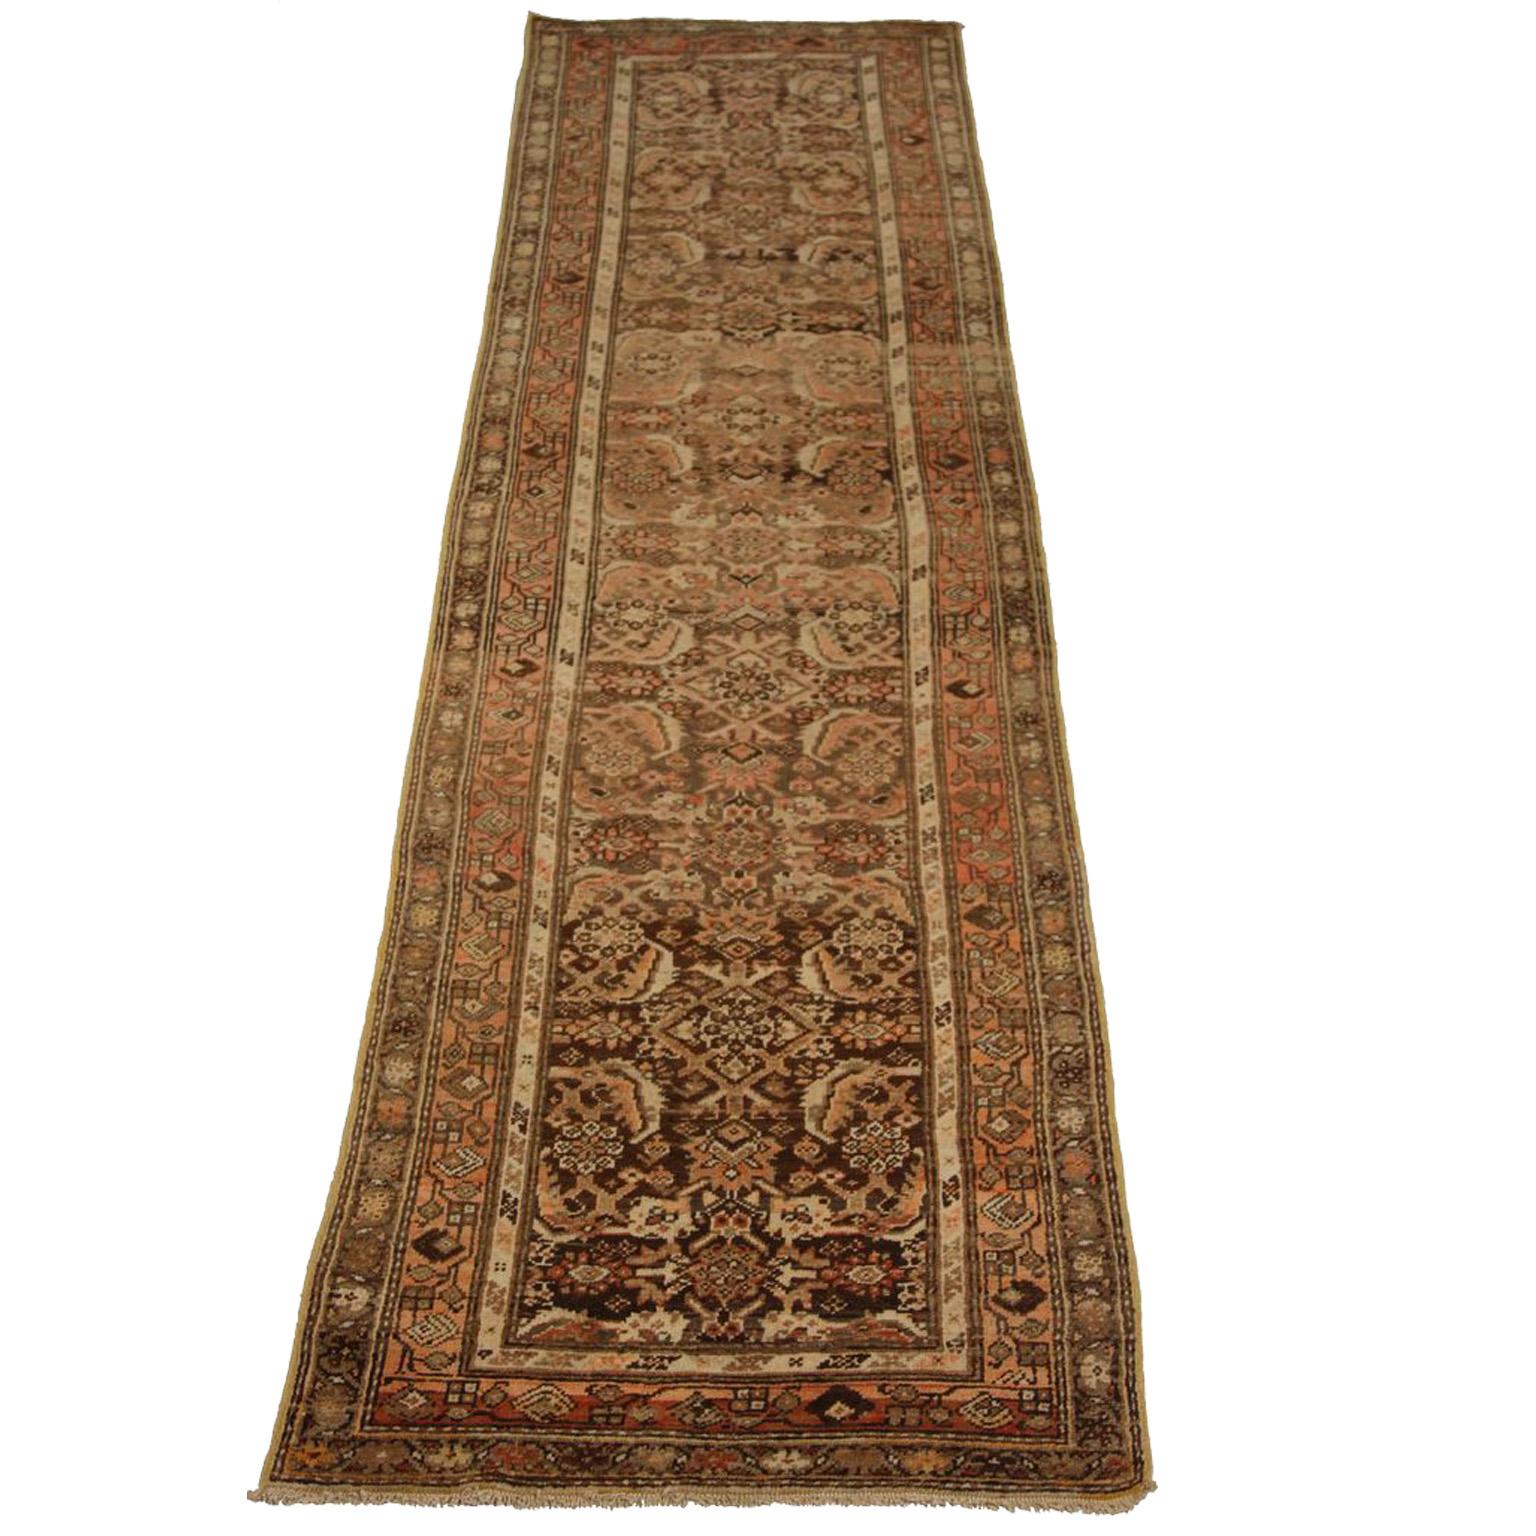 Made from handspun wool of the finest grade, this antique Persian rug has its entire body covered in Zanjan style design patterns. Its black, orange and brown color mix lends it an air of royalty which is a great fit for contemporary and Mid-Century